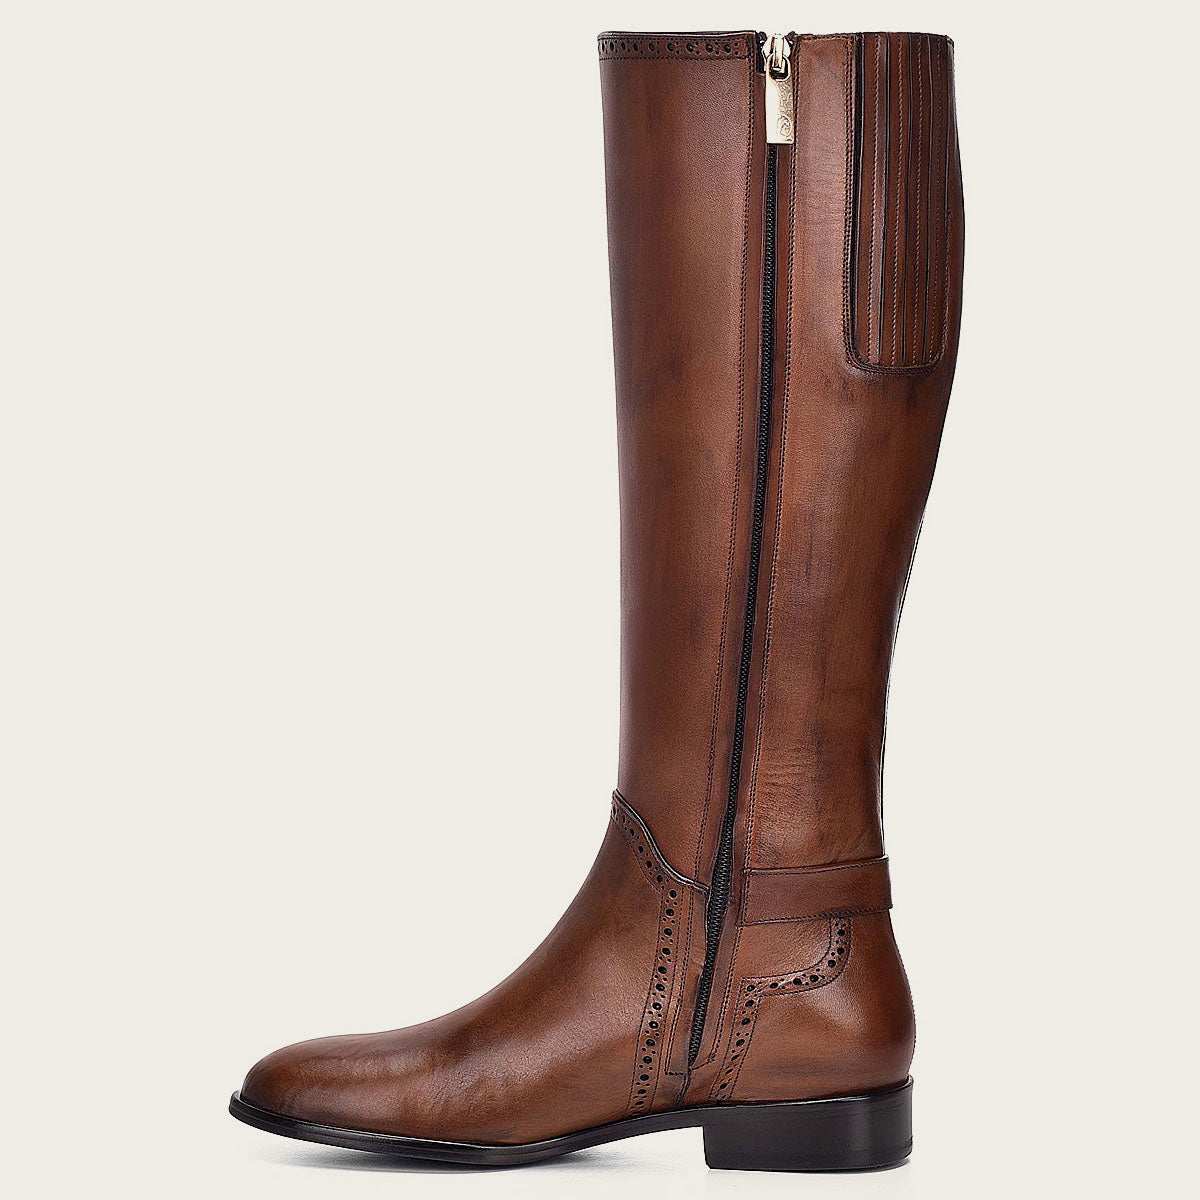 A beautiful honey-colored leather riding boot, hand-painted with intricate details, perfect for the fashion-forward equestrian.